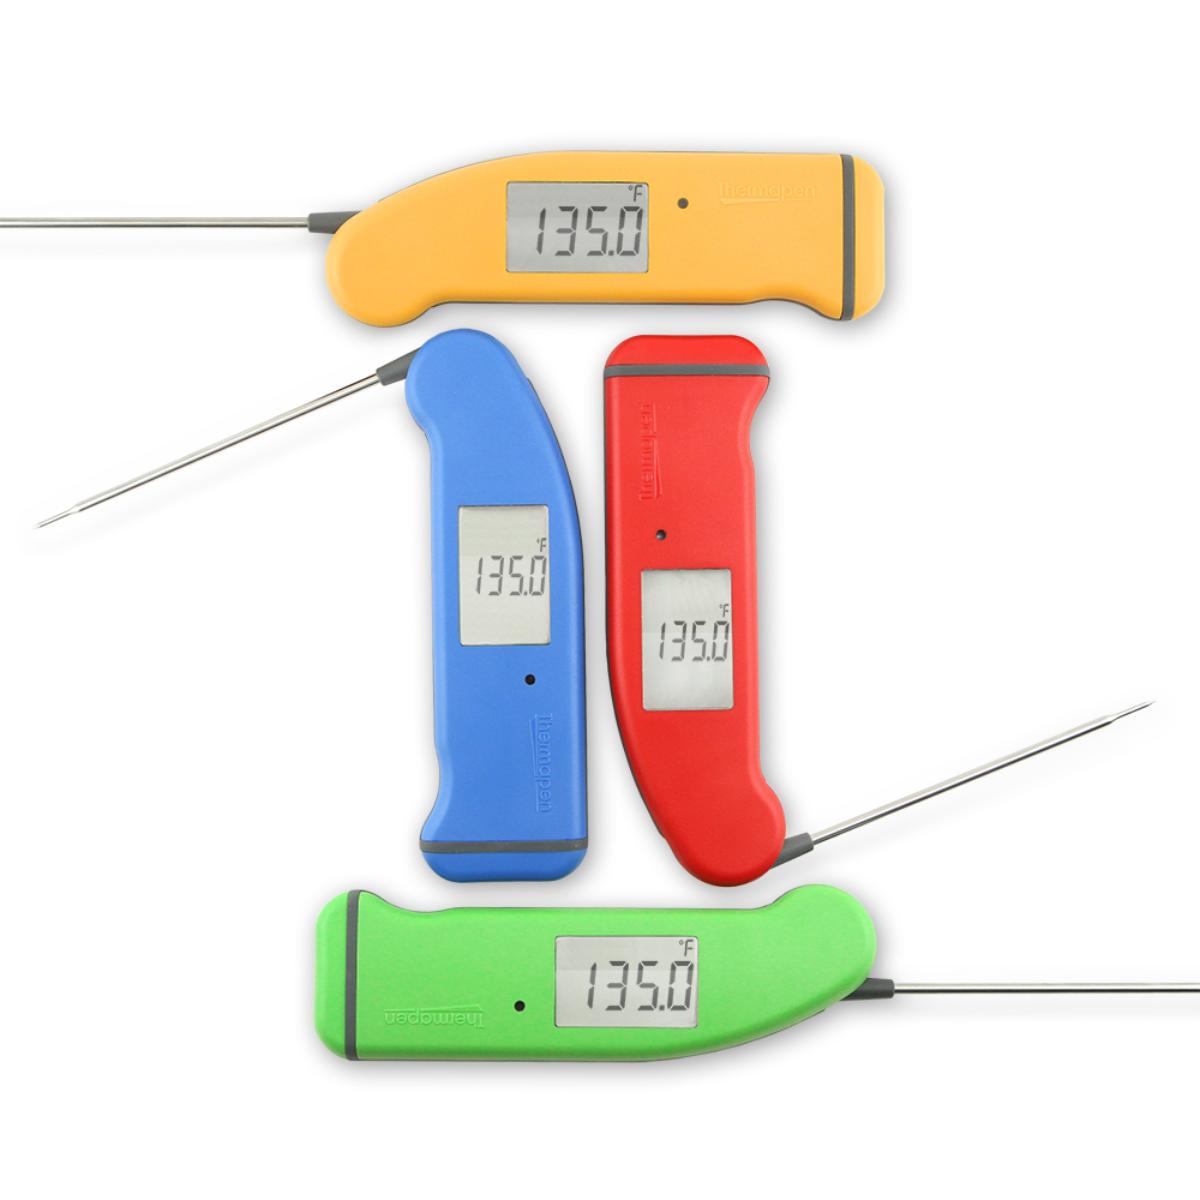 https://www.thermoworks.com/content/press/press-images/Thermapen-Mk4_generic-01.jpg